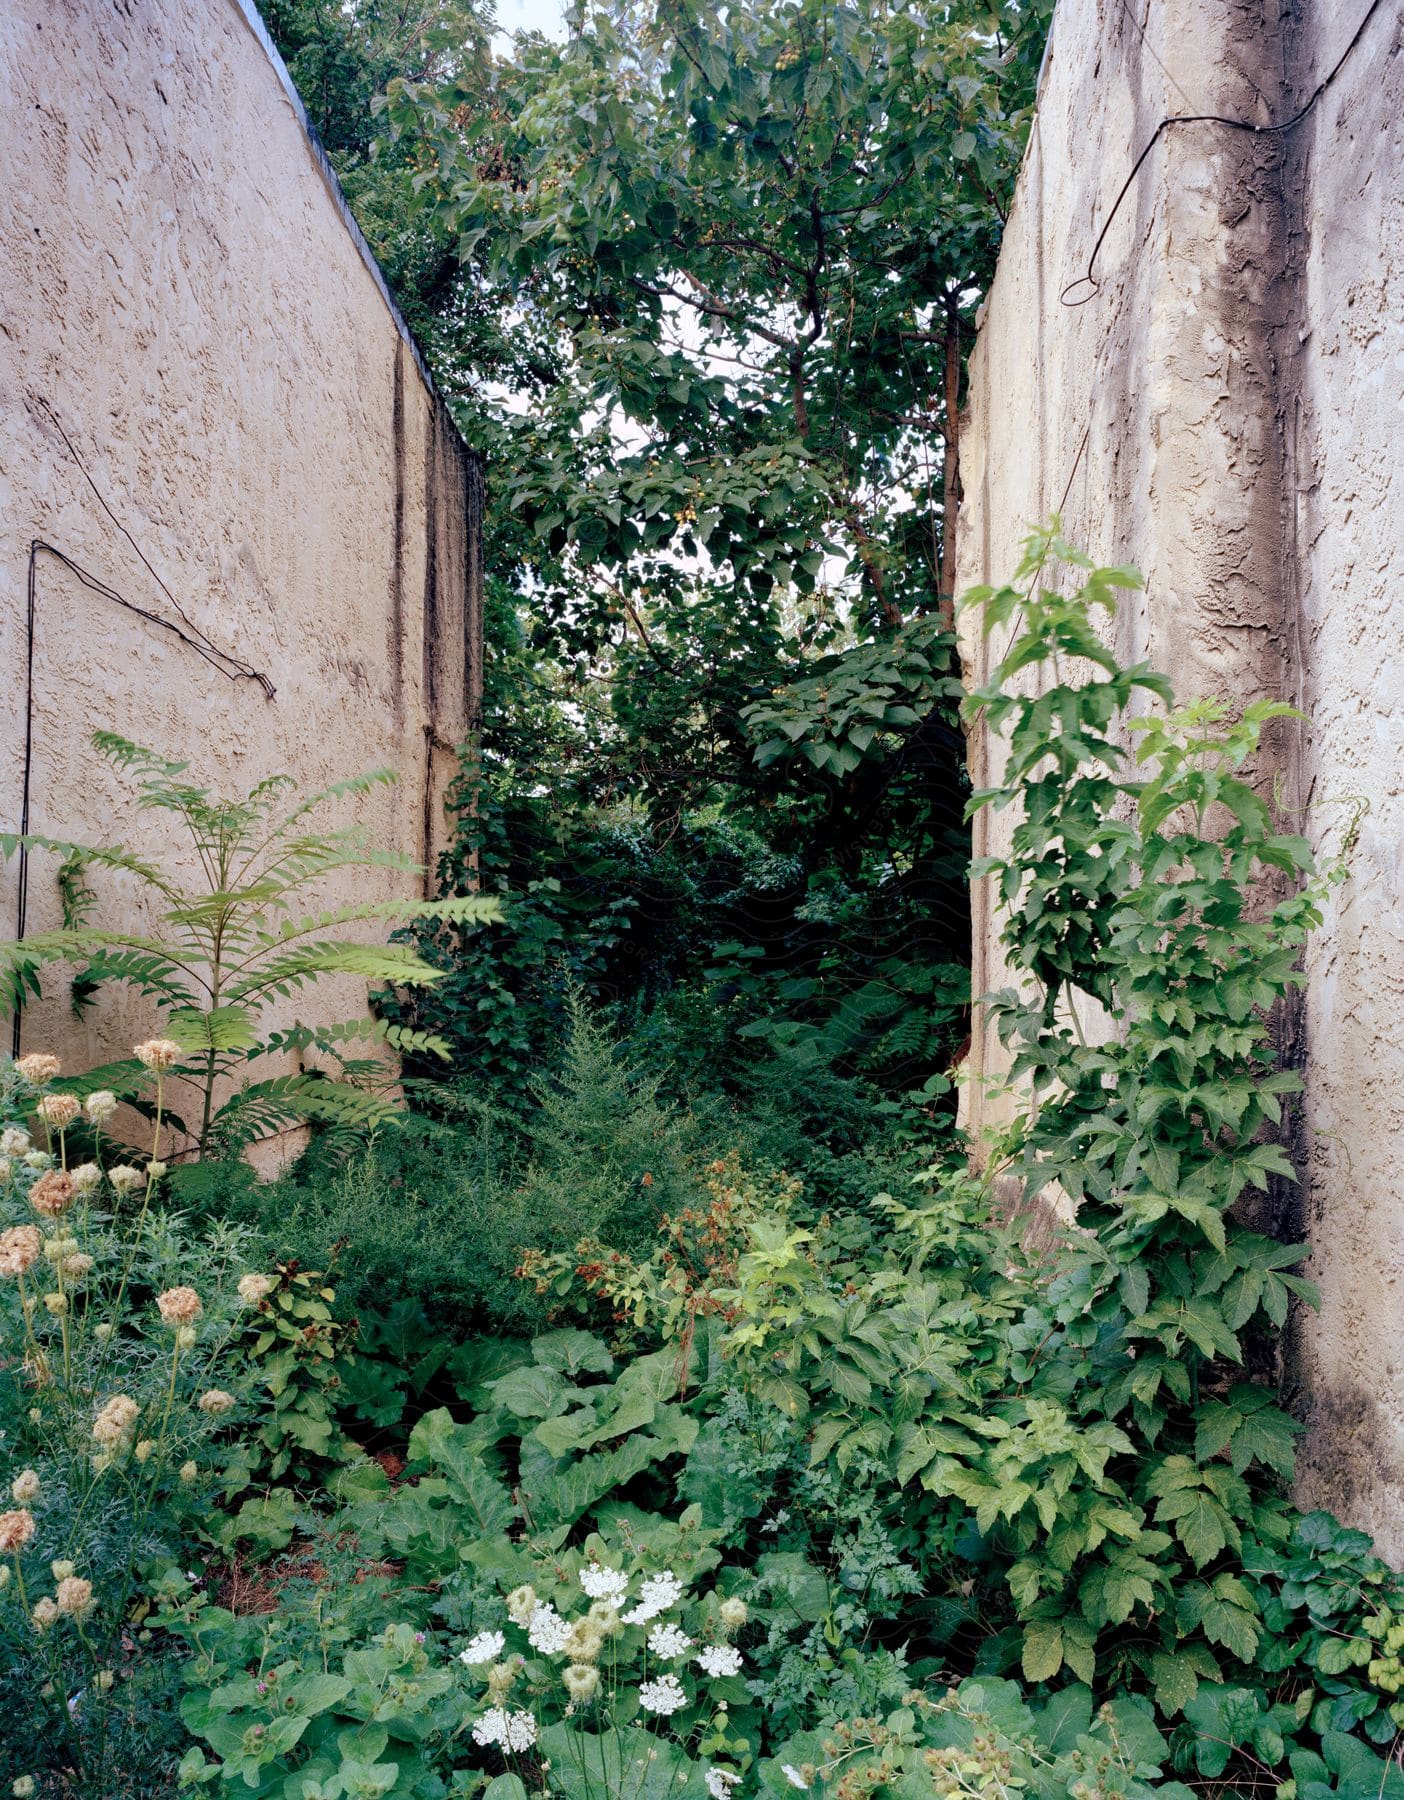 Flowers and vegetation growing wild between two tall concrete walls